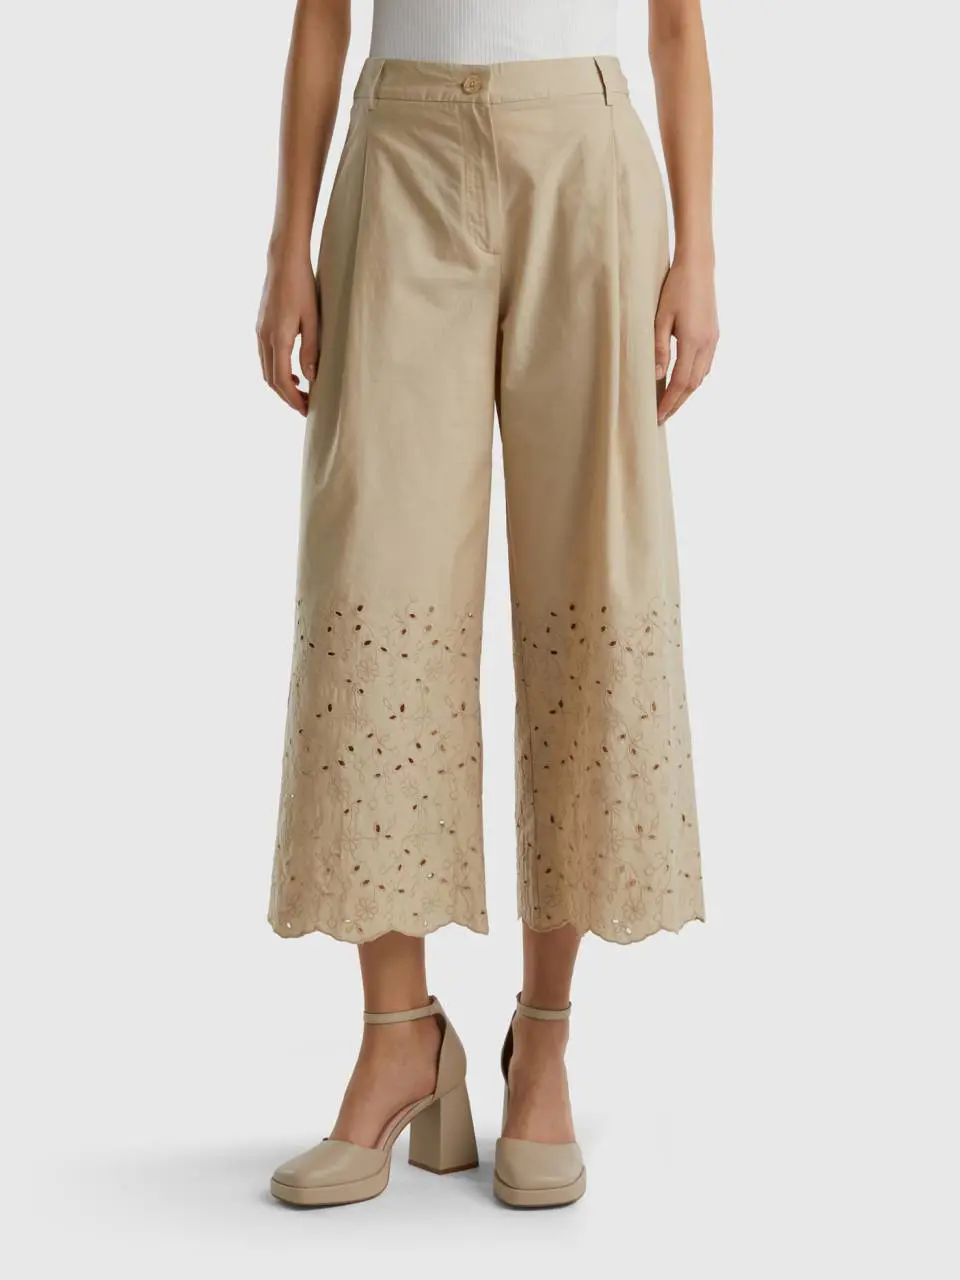 Benetton wide trousers with broderie anglaise embroidery. 1